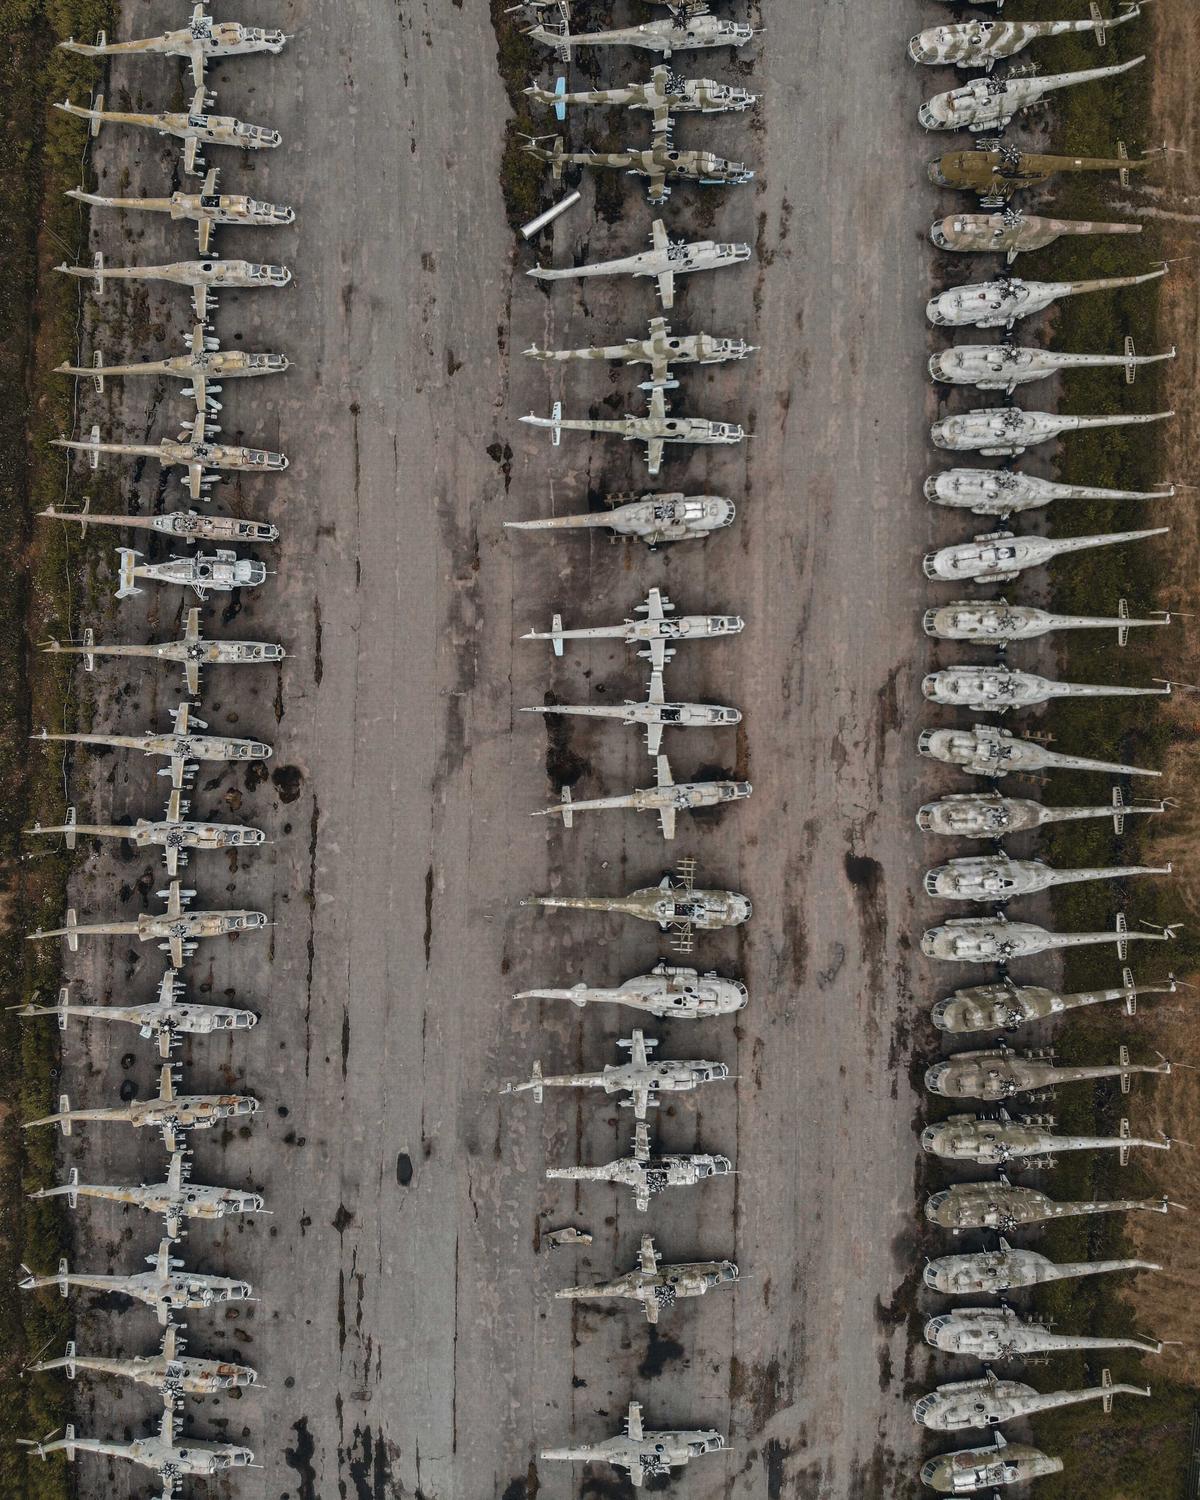 Helicopter cemetery. (Courtesy of Caters News)